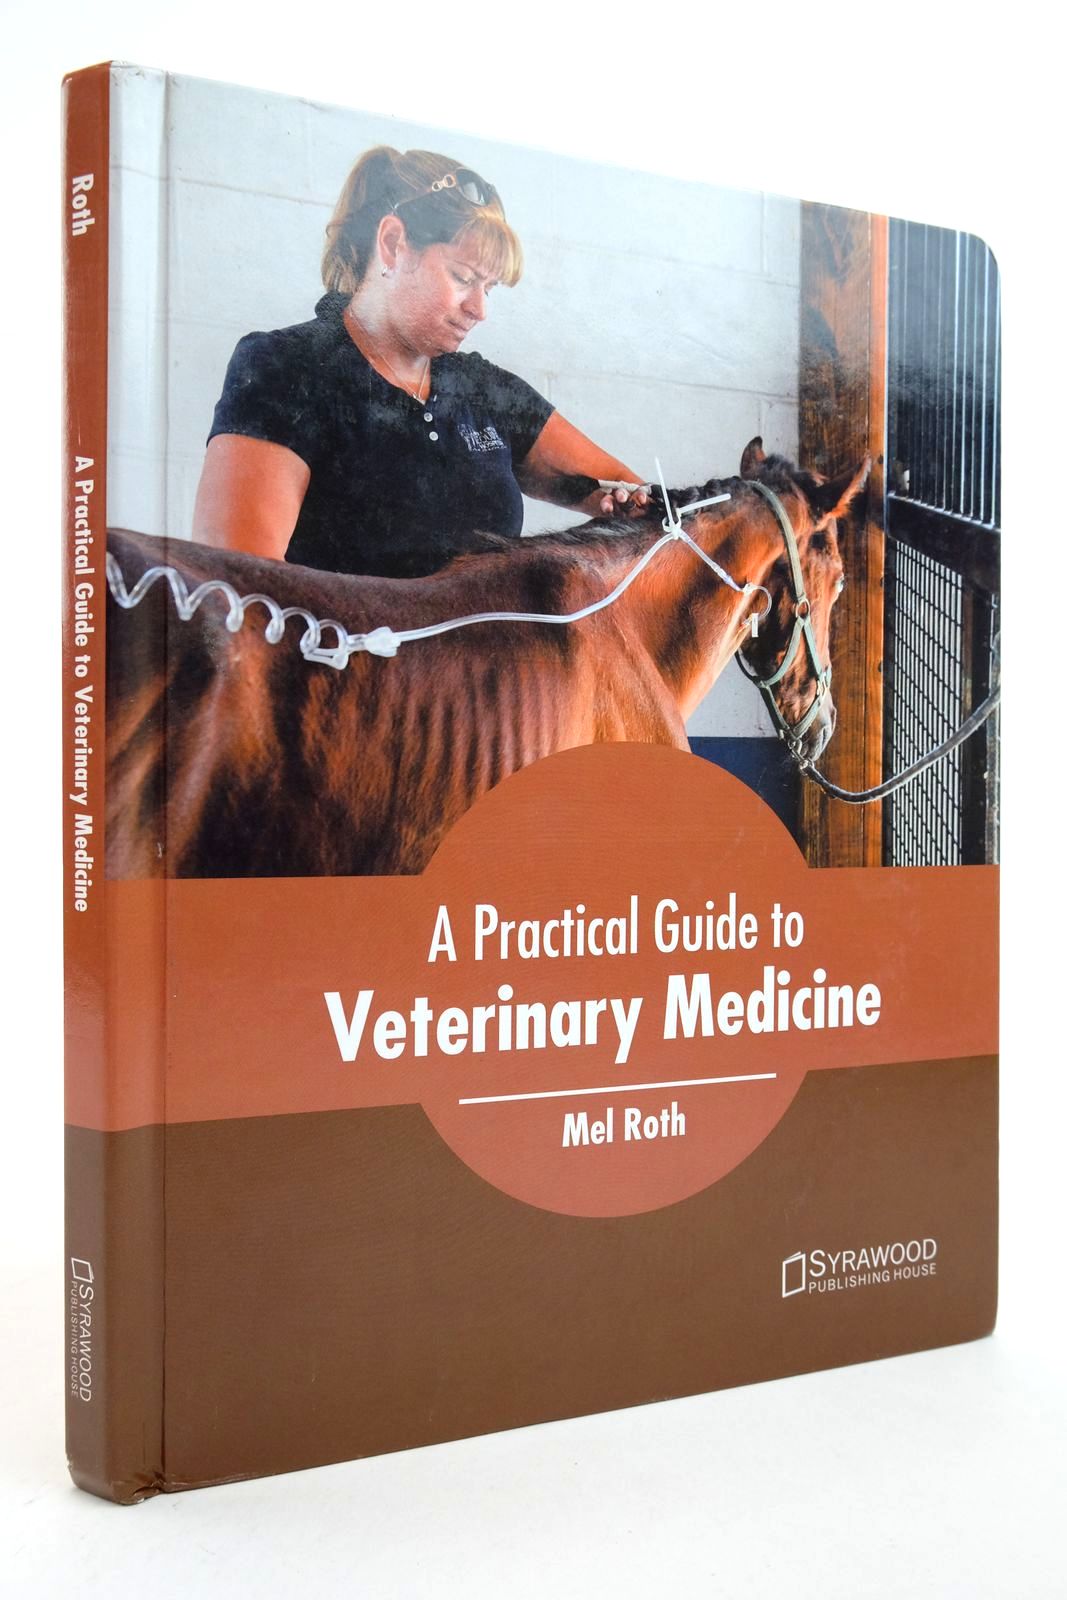 Photo of A PRACTICAL GUIDE TO VETERINARY MEDICINE written by Roth, Mel published by Syrawood Publishing House (STOCK CODE: 2140152)  for sale by Stella & Rose's Books